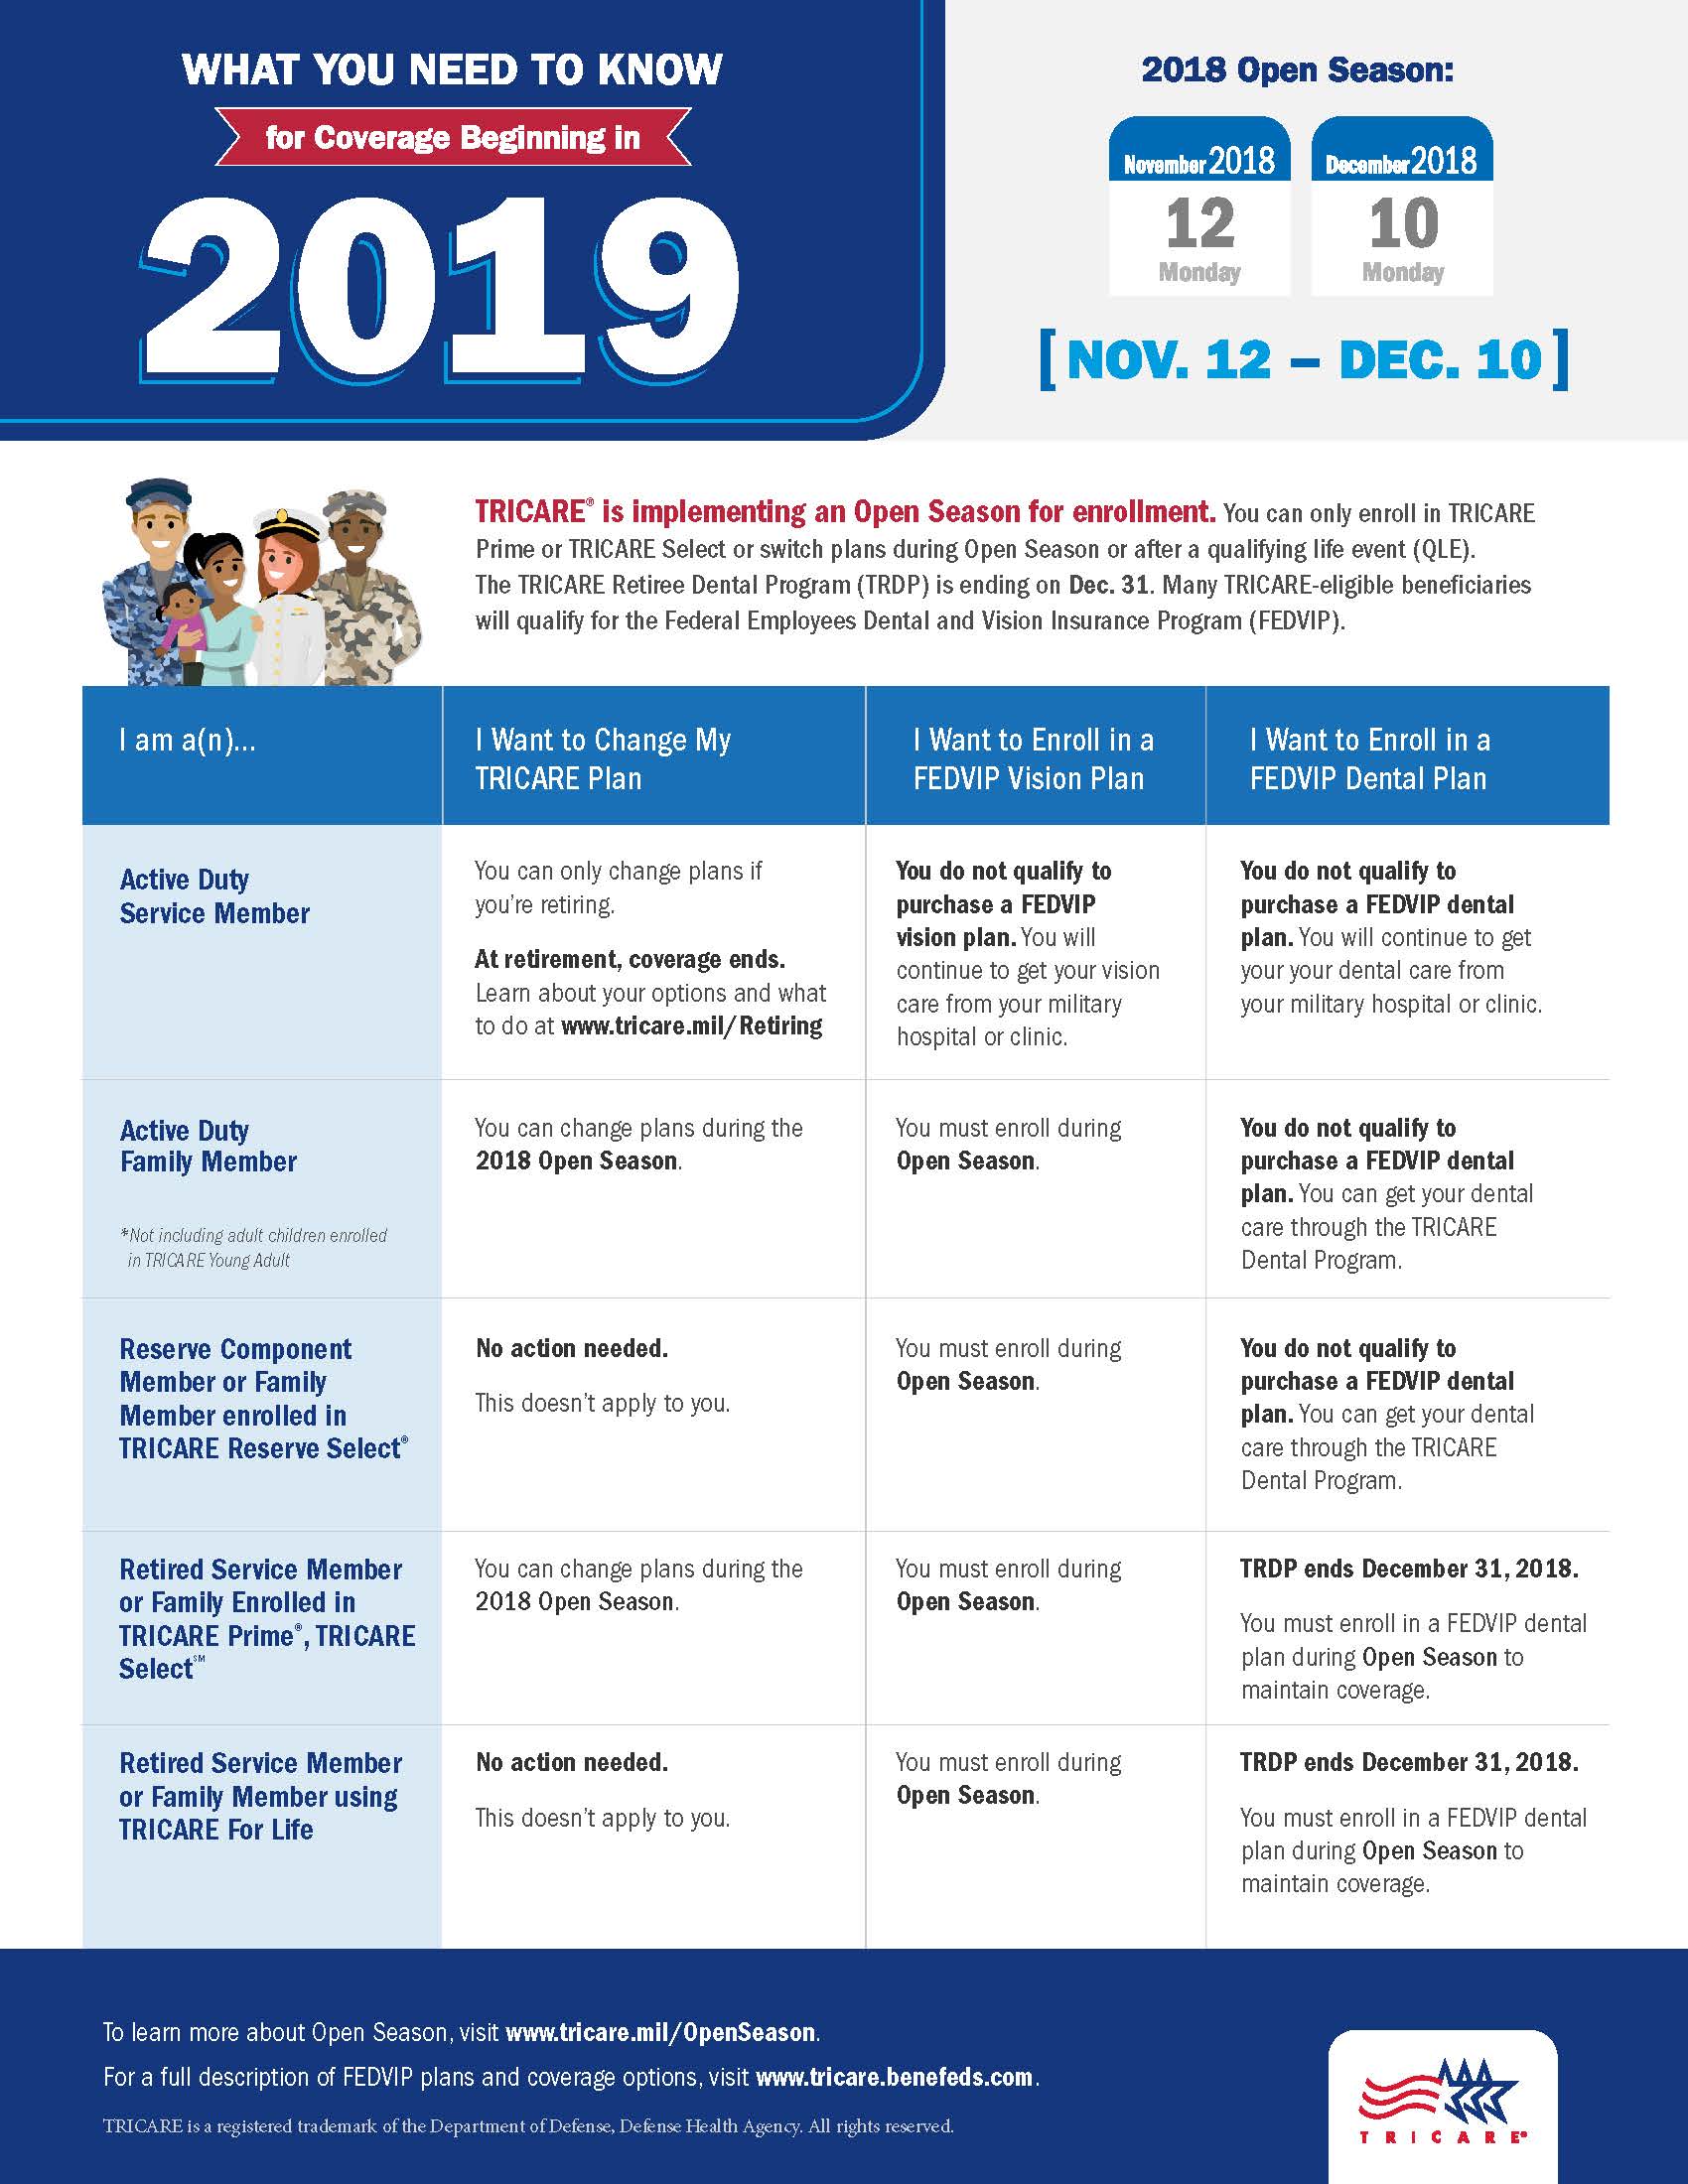 TRICARE Open Season Military Connection